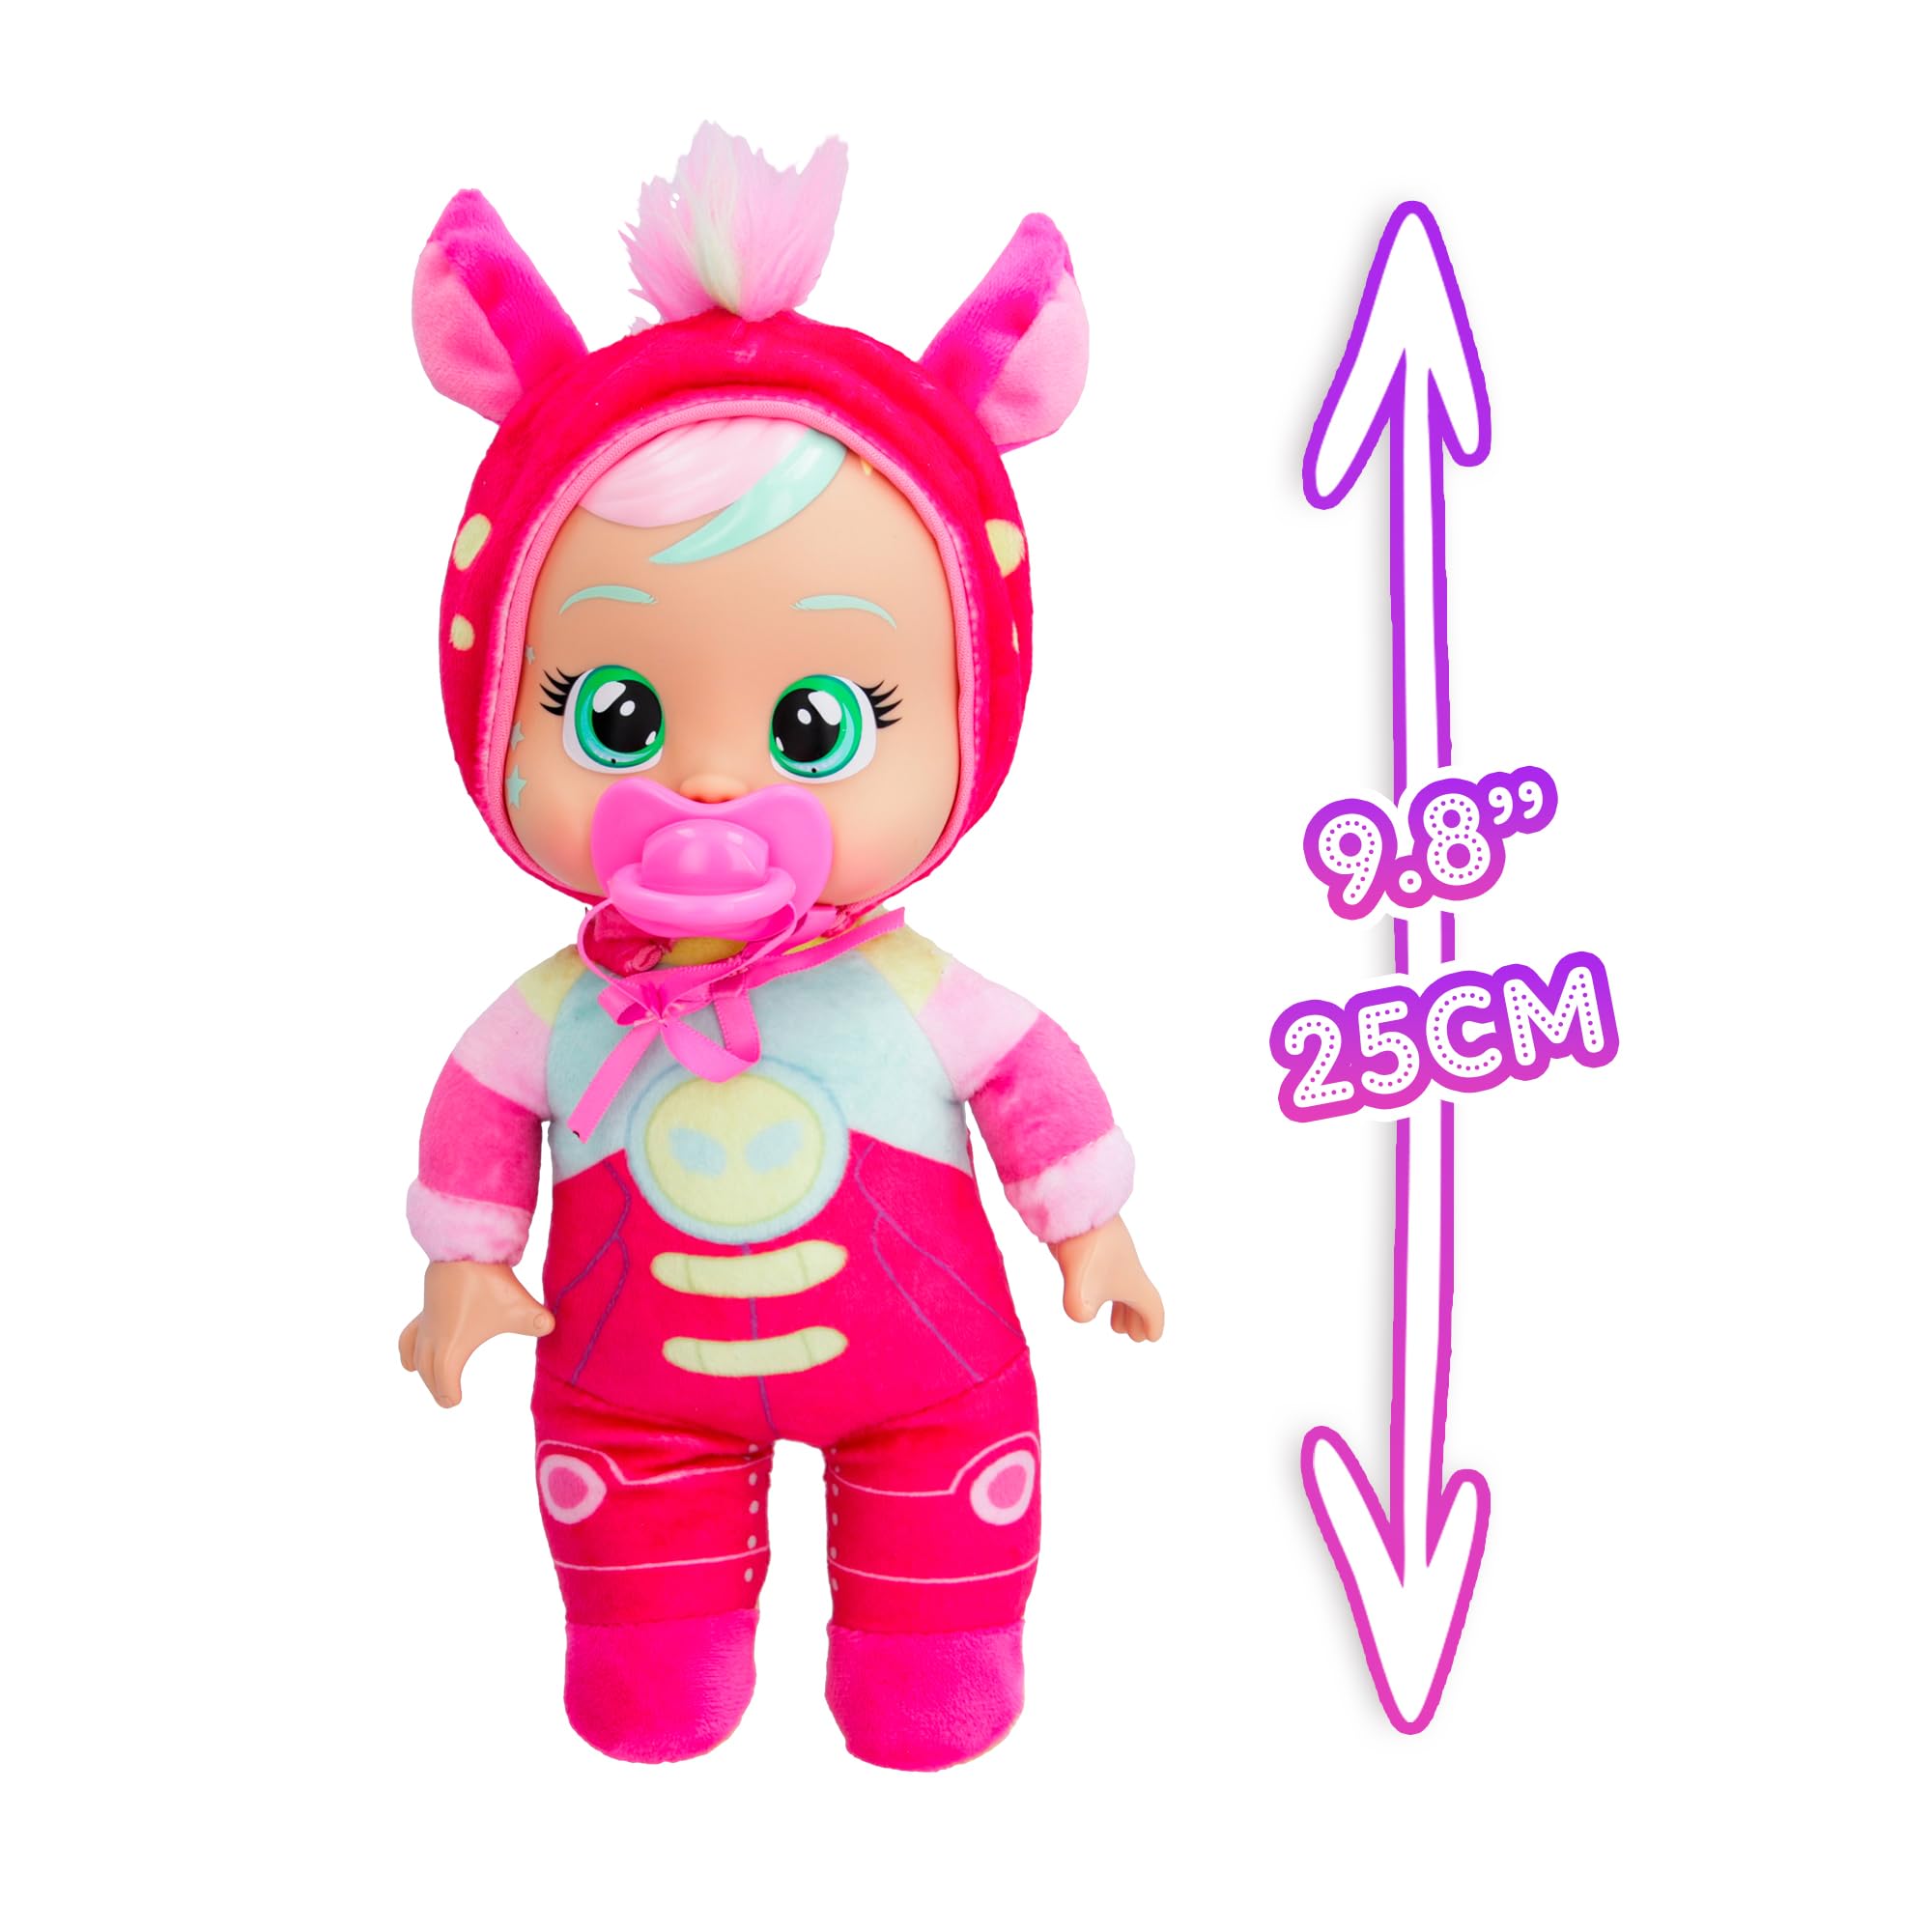 Cry Babies Tiny Cuddles Talents Hannah, Dressed Up As an Astronaut and Cries Real Tears, 9 Inch Baby Doll